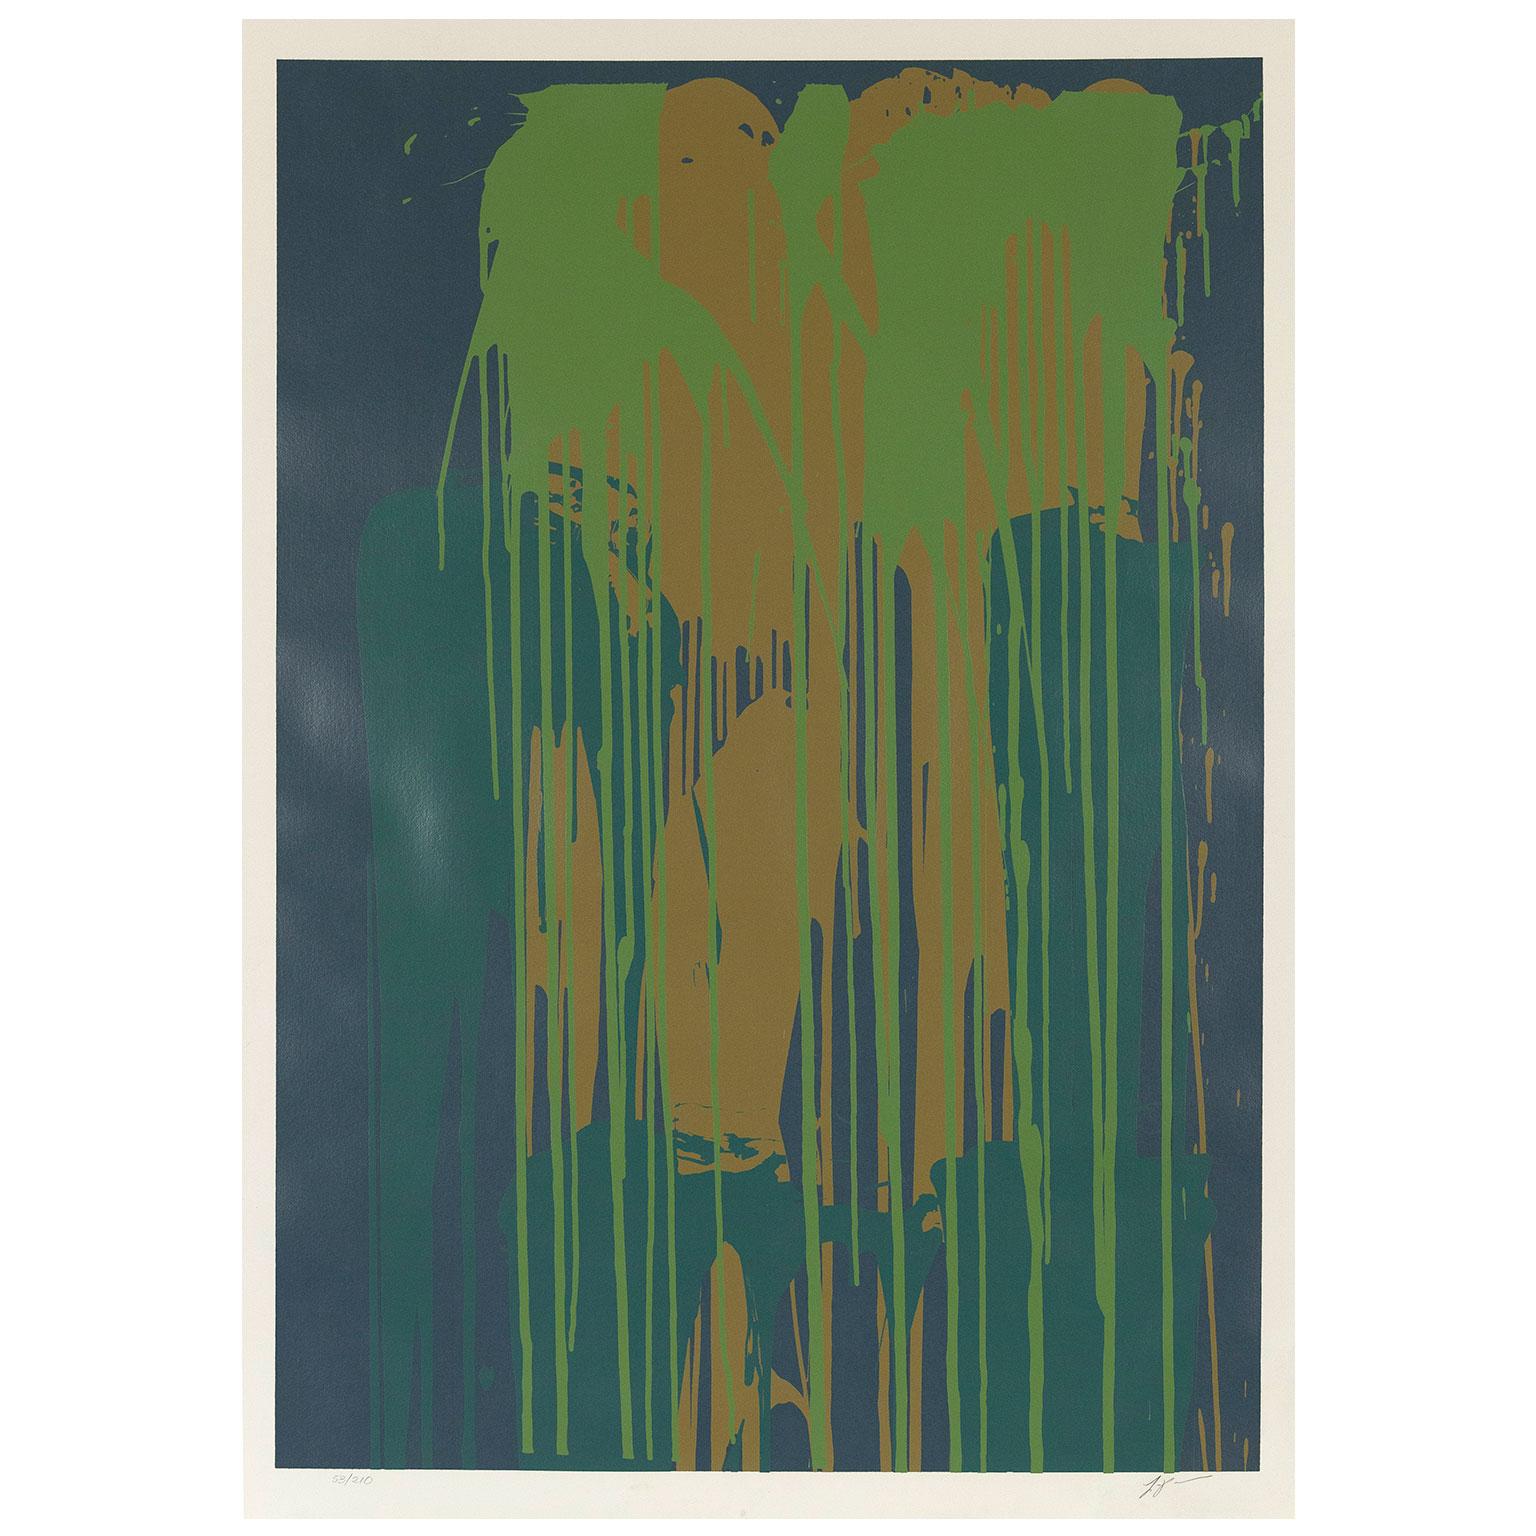 Larry Poons (b.1937) is a well-known American abstract painter. A contemporary of Frank Stella, he similarly radically changed his aesthetic within a few years of establishing his reputation in the early 1960's. 

By the 1970's Poons completely